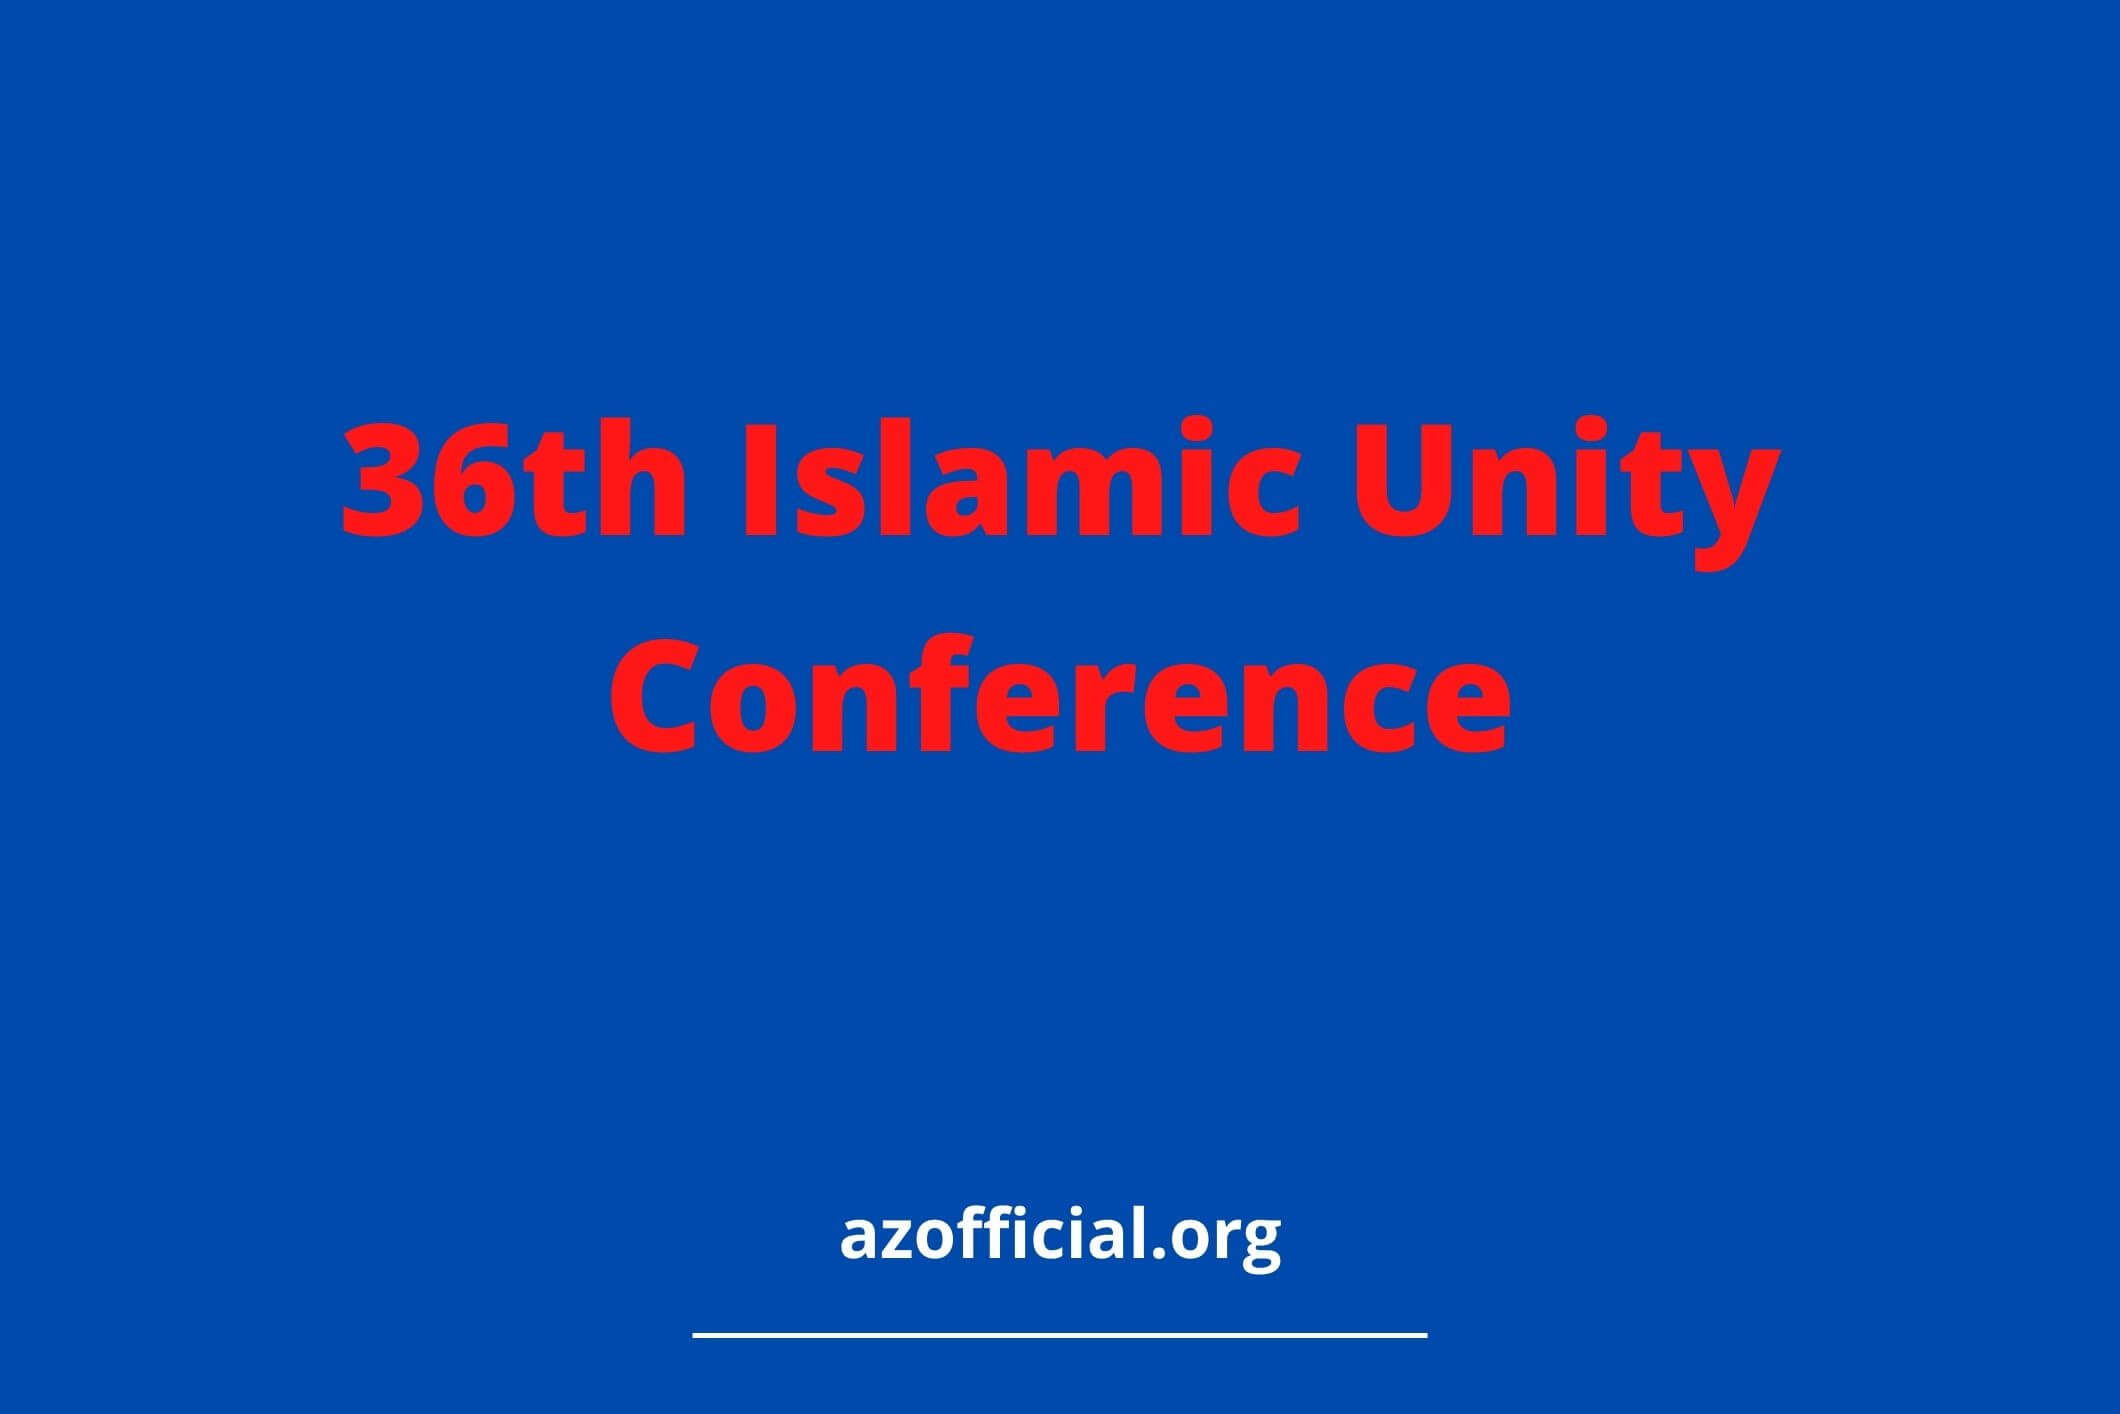 36th Islamic Unity Conference will Take Fresh Approach